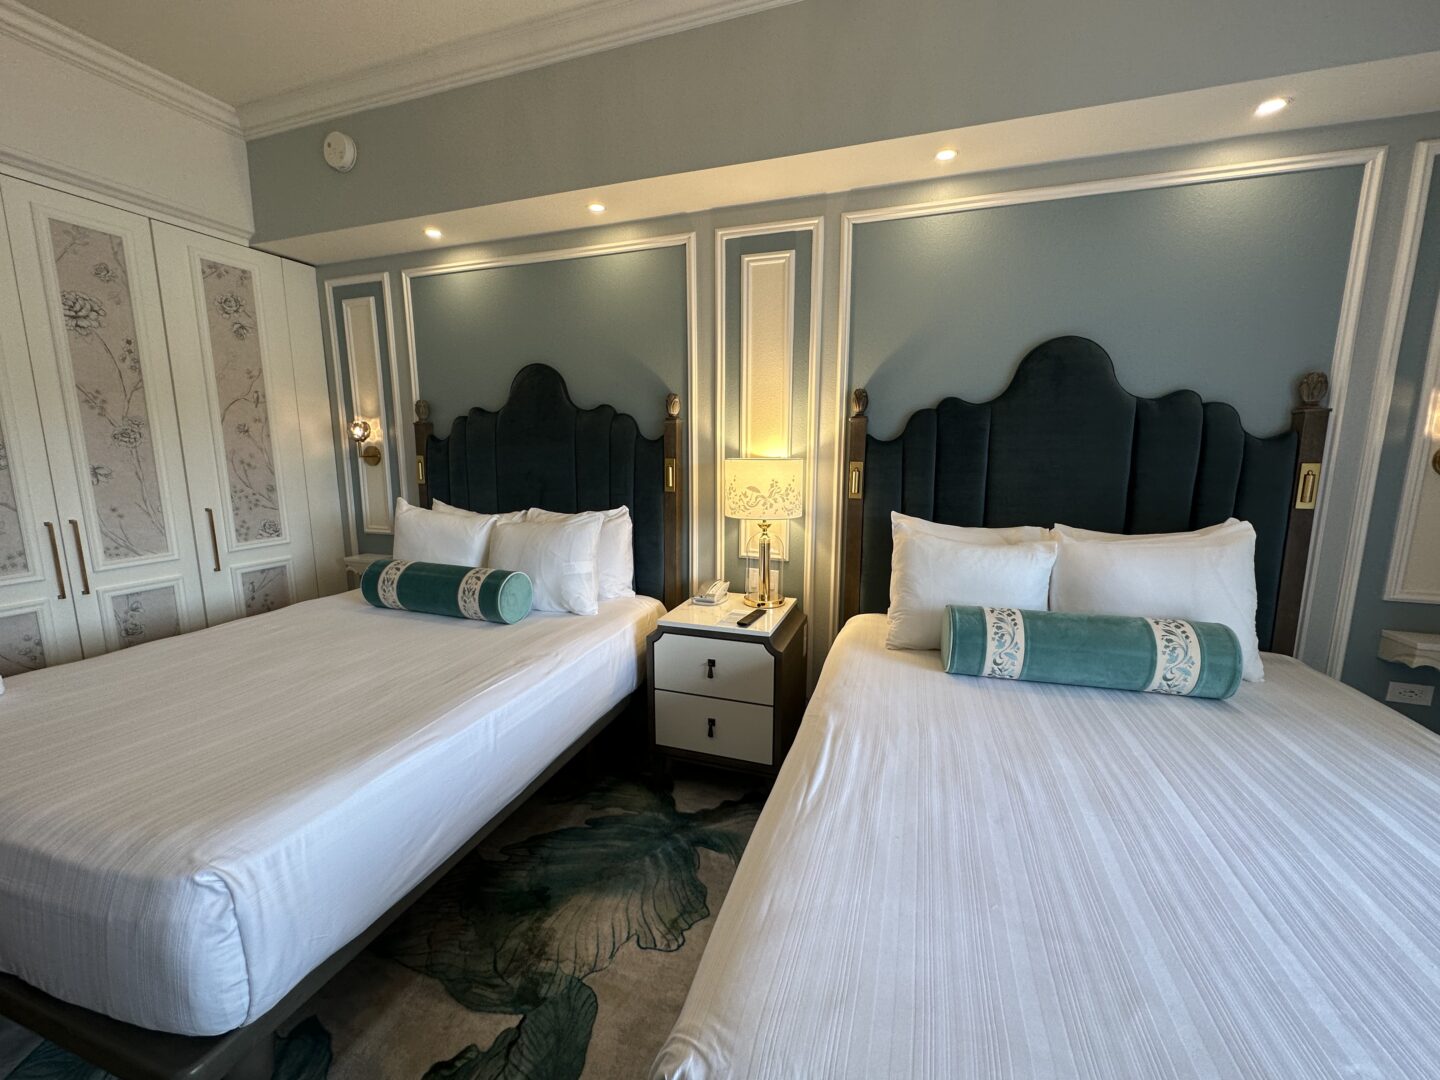 Tour the New Mary Poppins Rooms at Disney’s Grand Floridian Resort